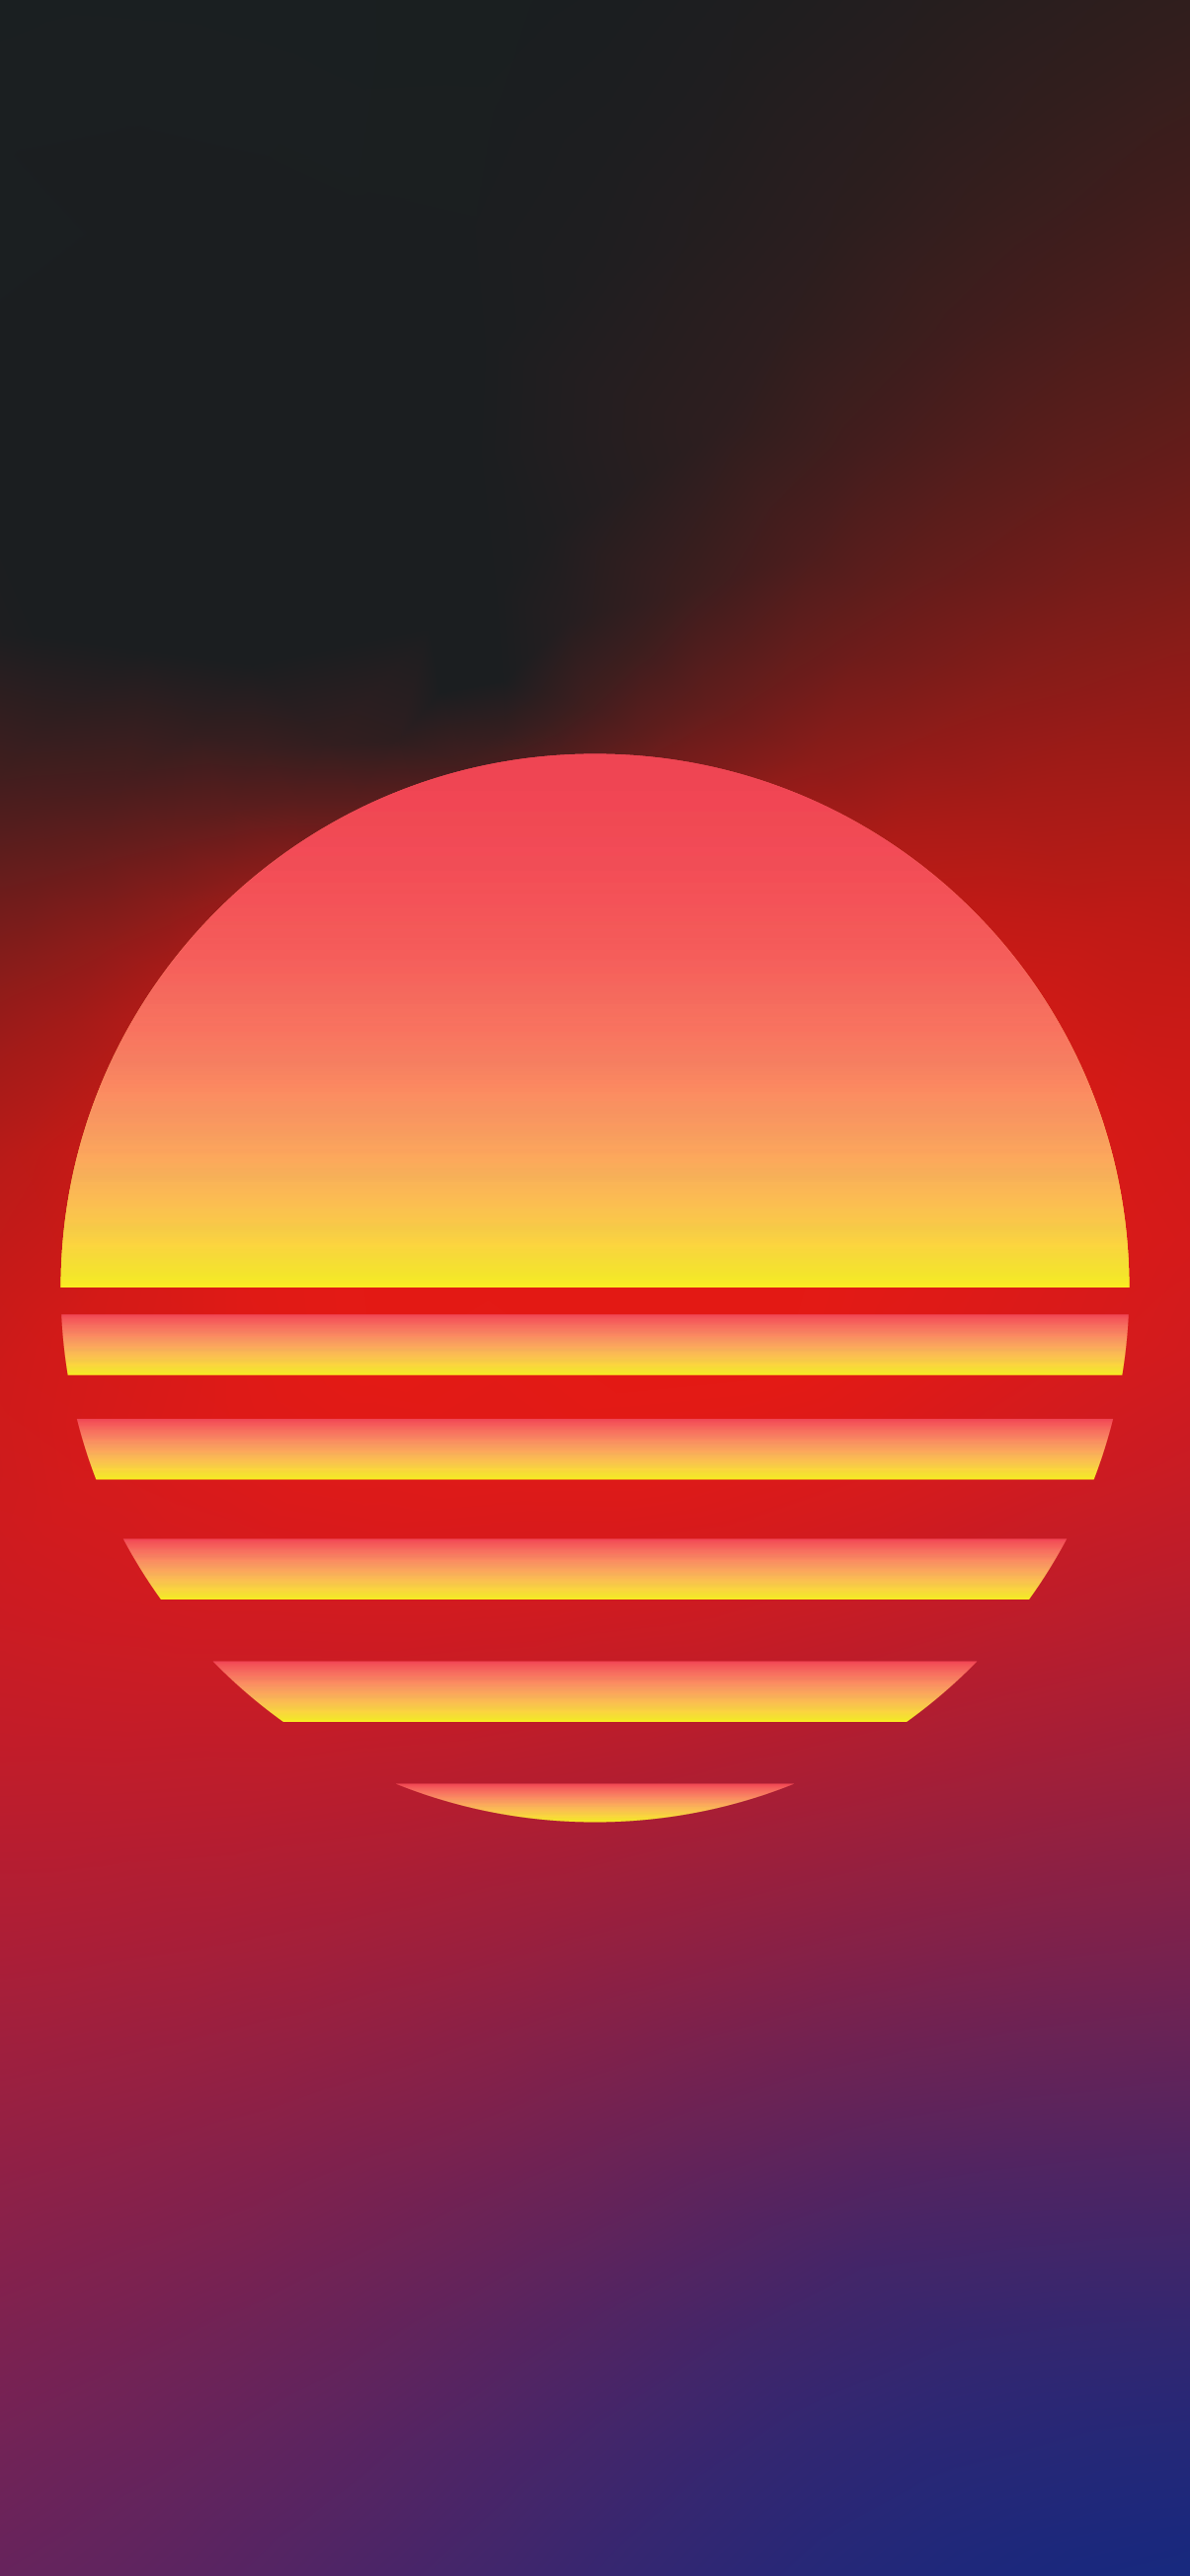 Wallpaper iphone Synthwave style sun WallpaperiZe Phone Wallpapers